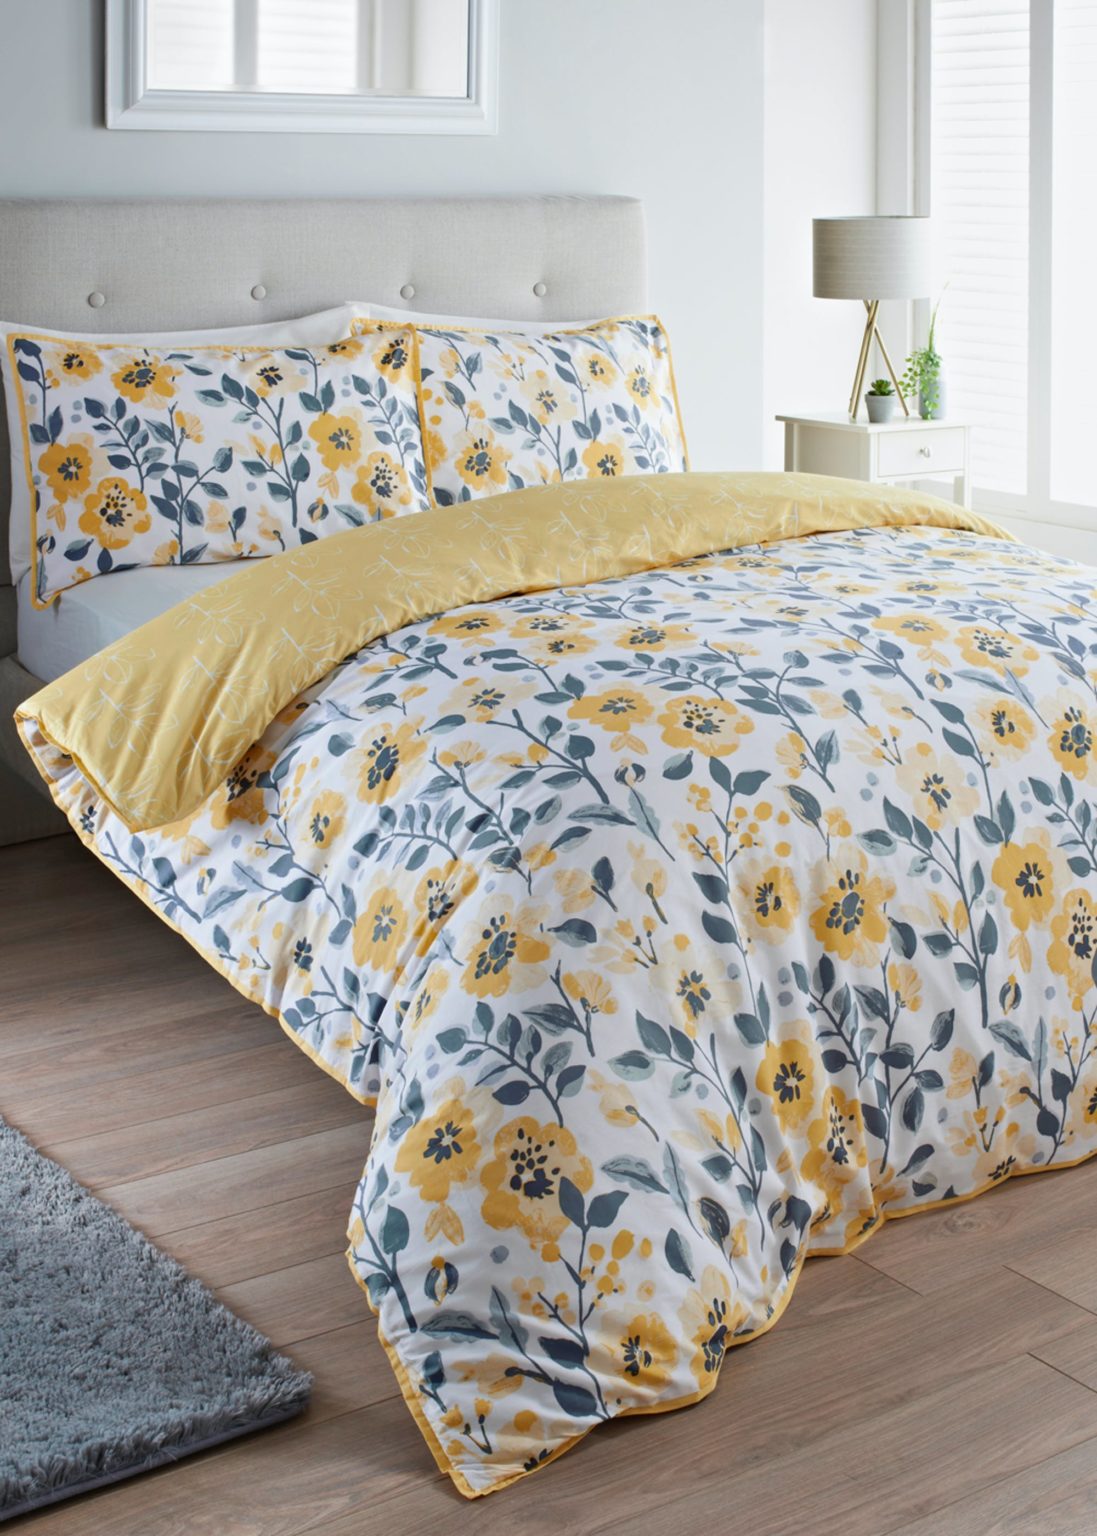 Reversible Yellow Floral Duvet Cover - £20.00 to £30.00